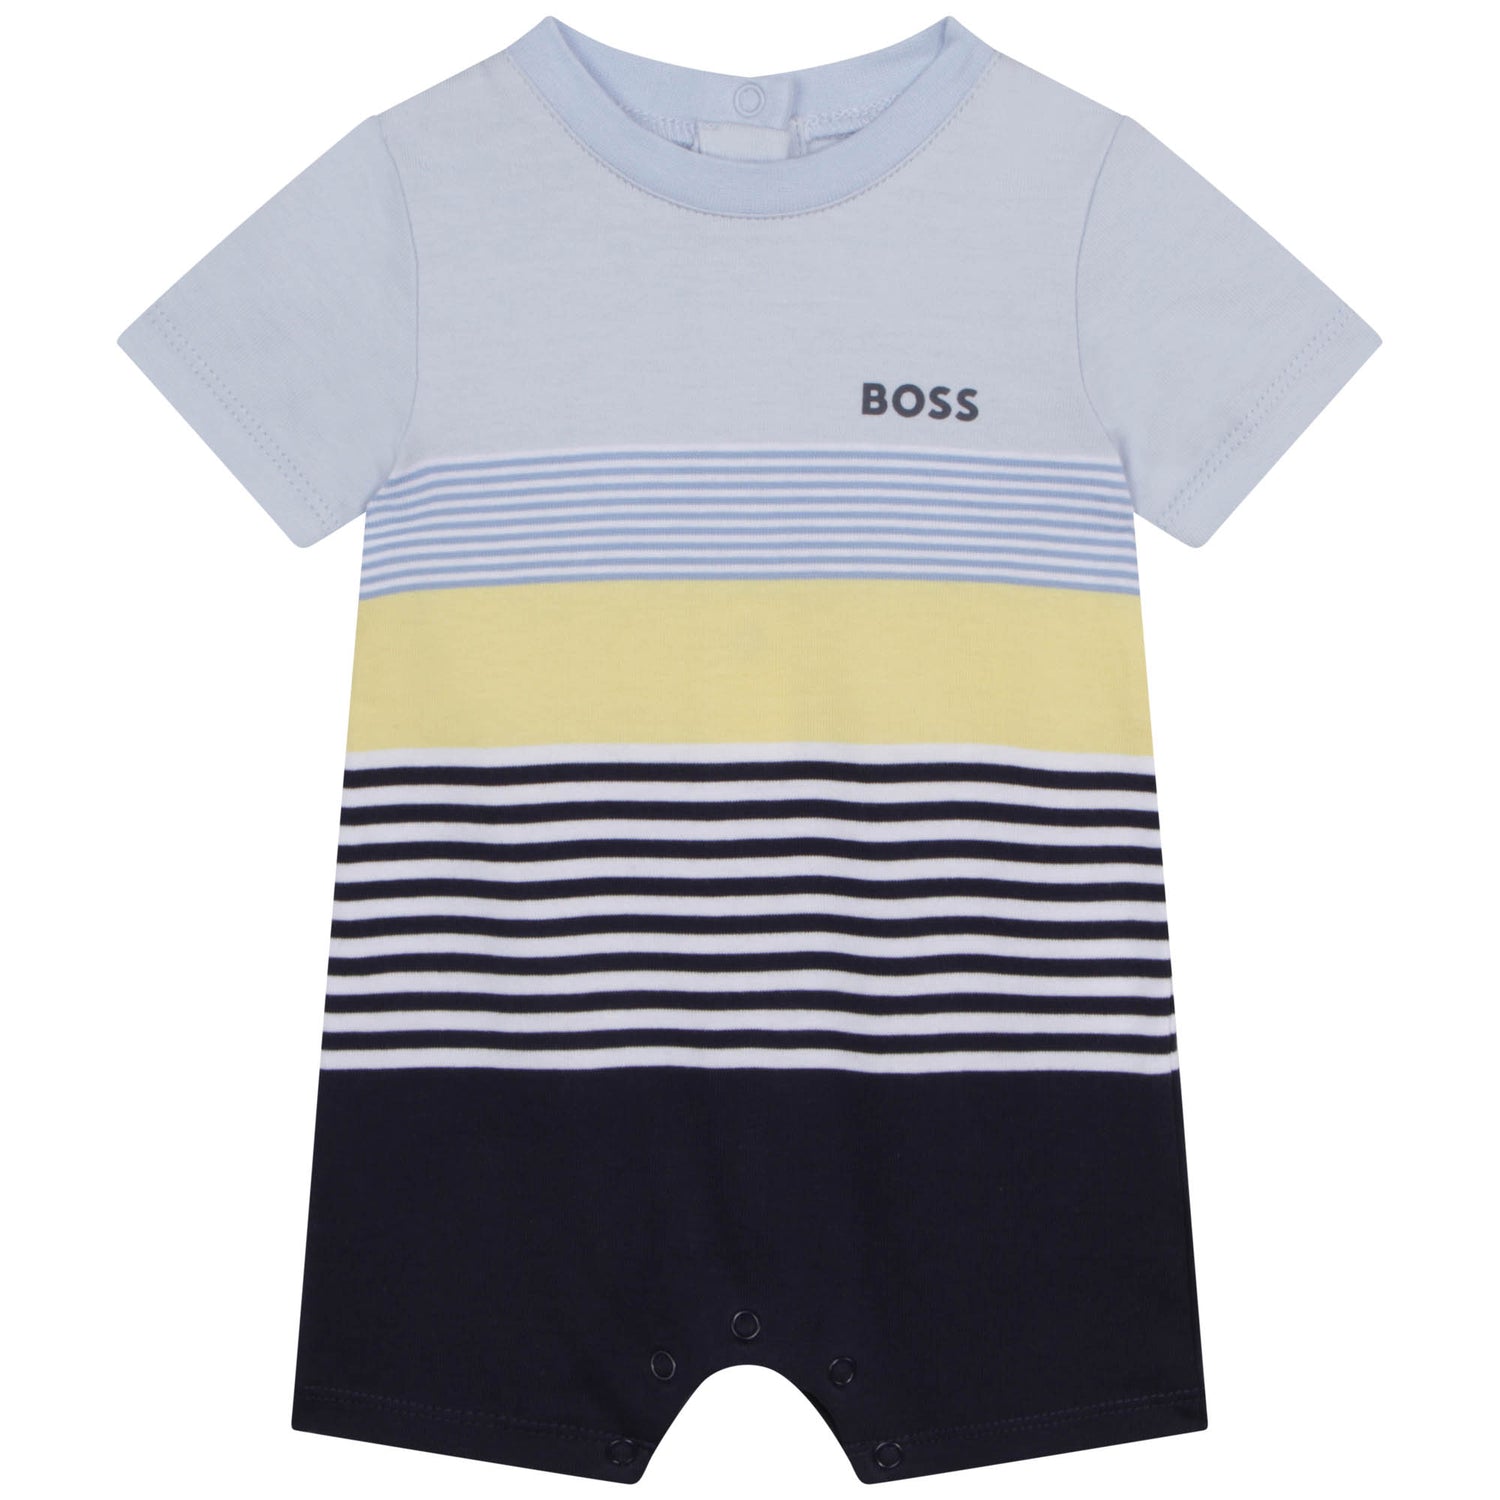 Hugo Boss Set All In One + Pull On Hat Style: J98412